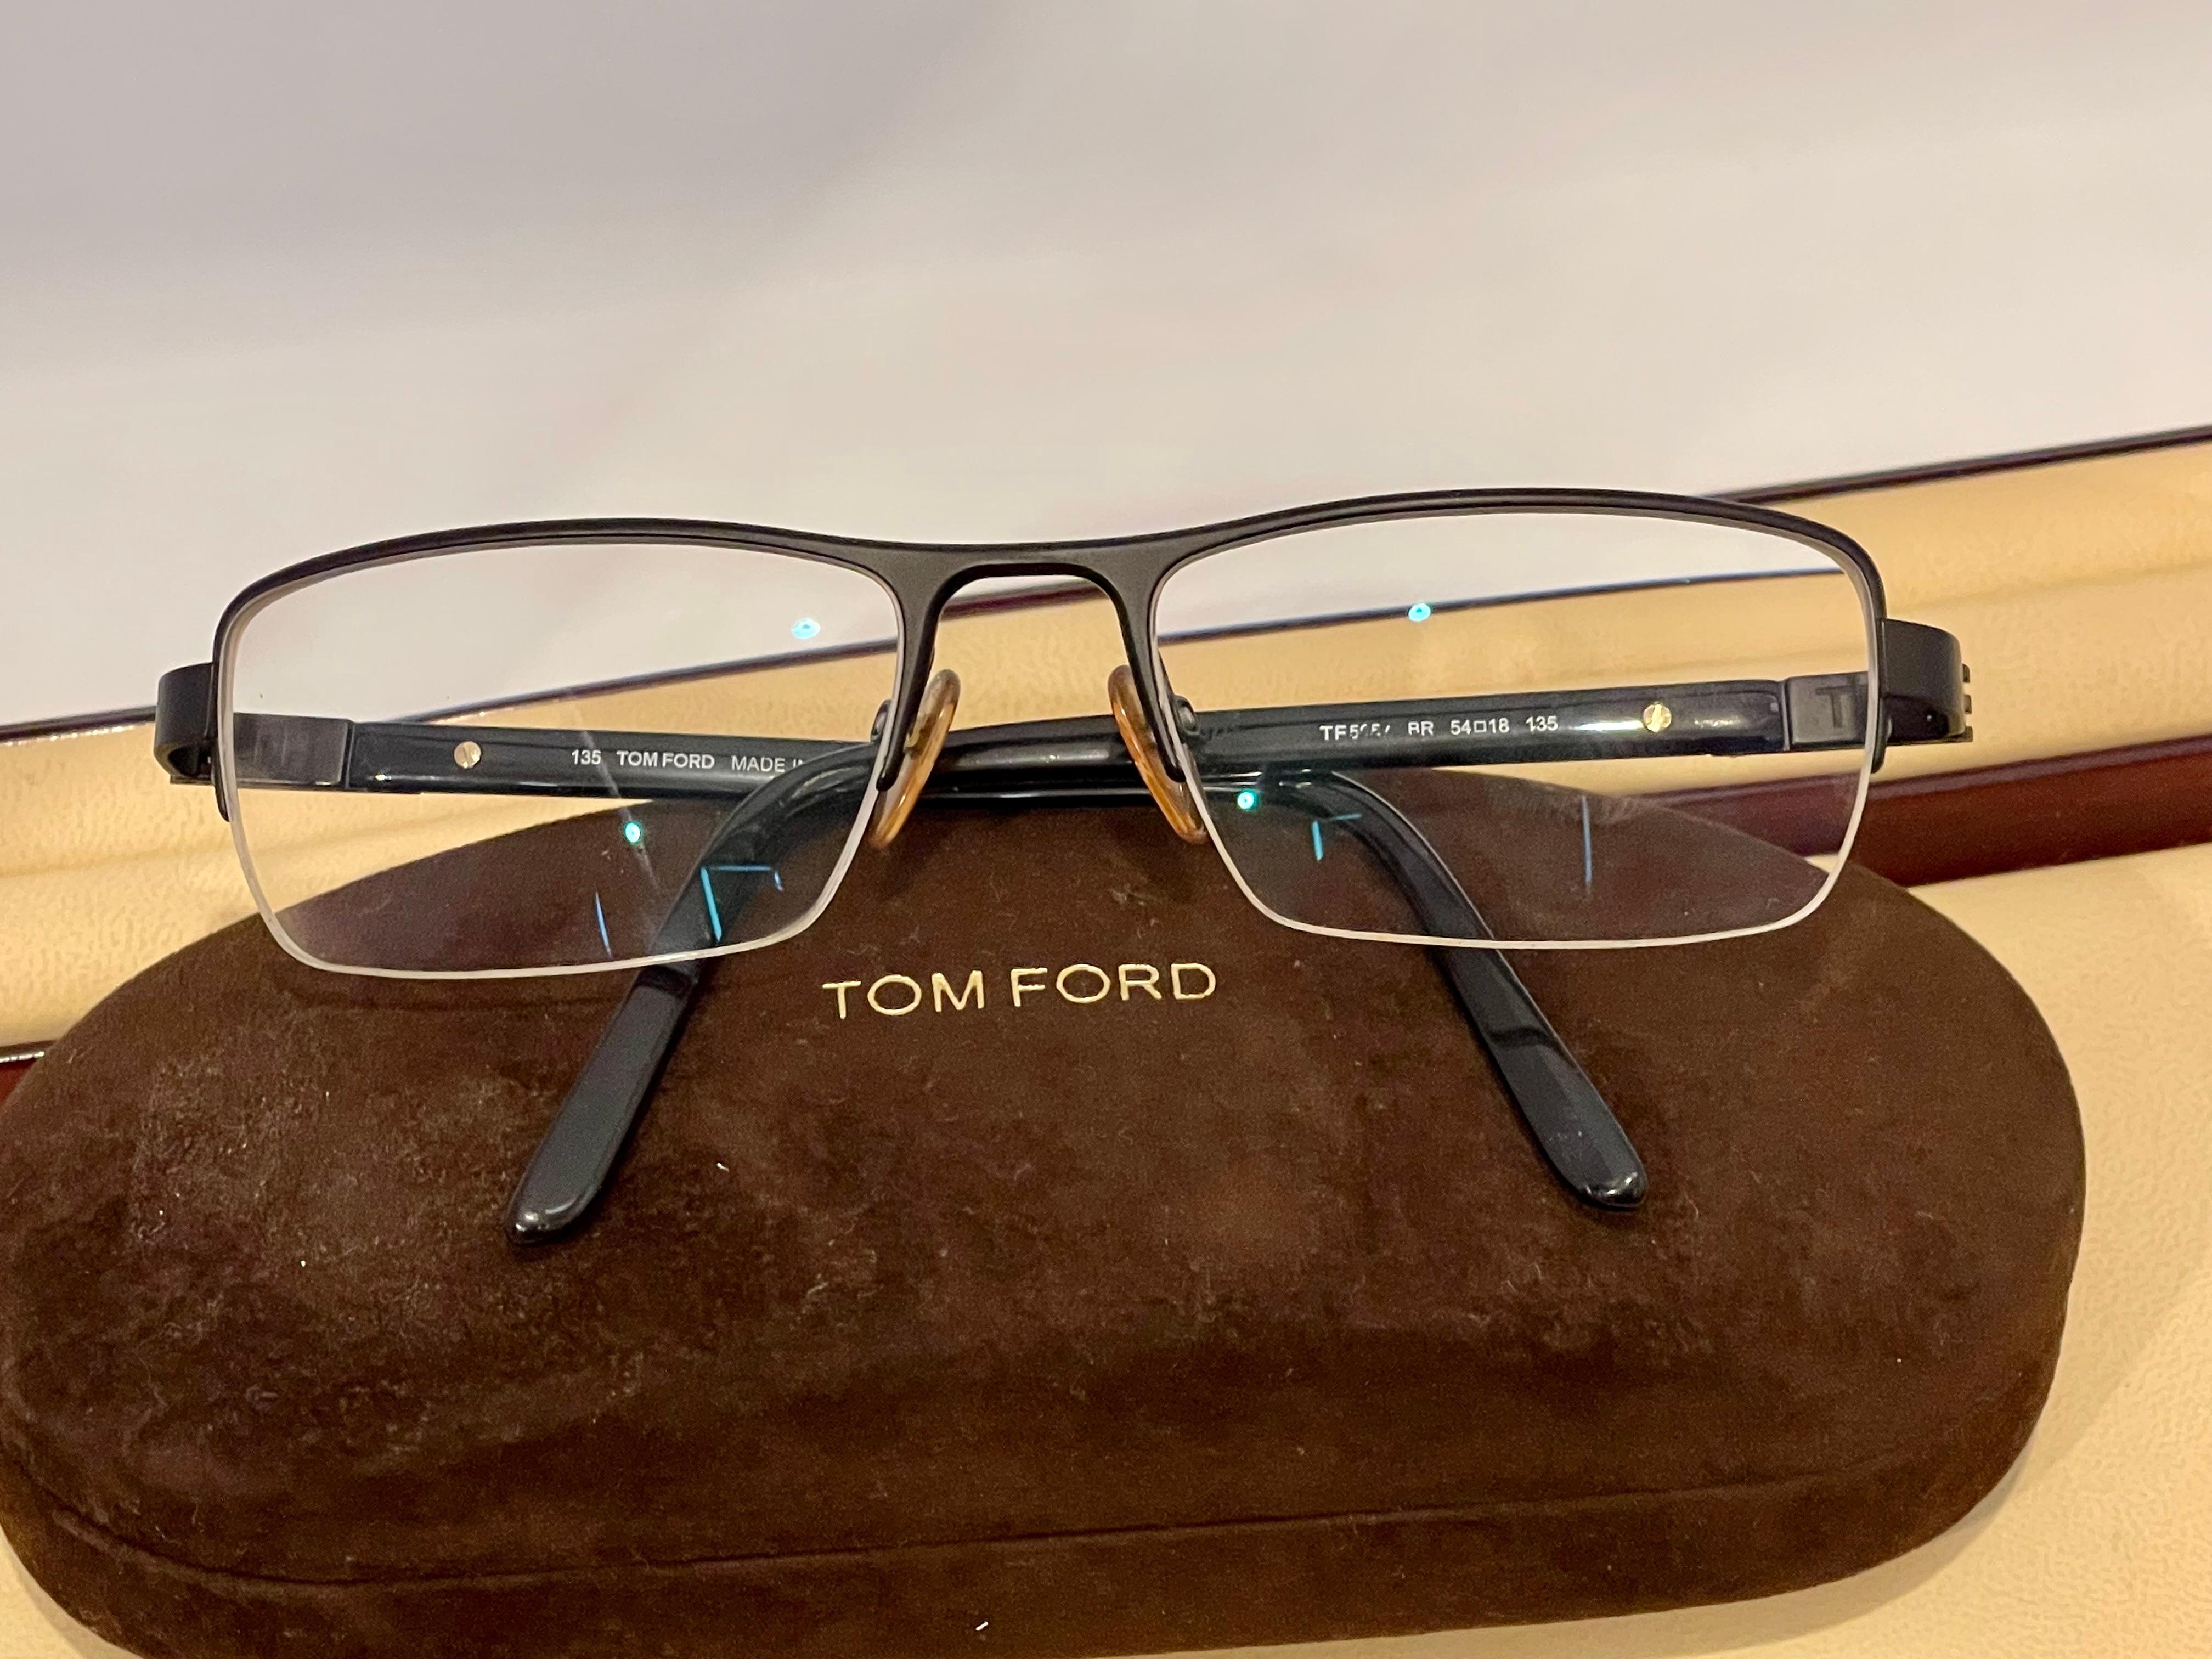 Tom Ford FT 5056 Rectangle Eyeglasses Solstice Sunglasses With Box For Sale 2